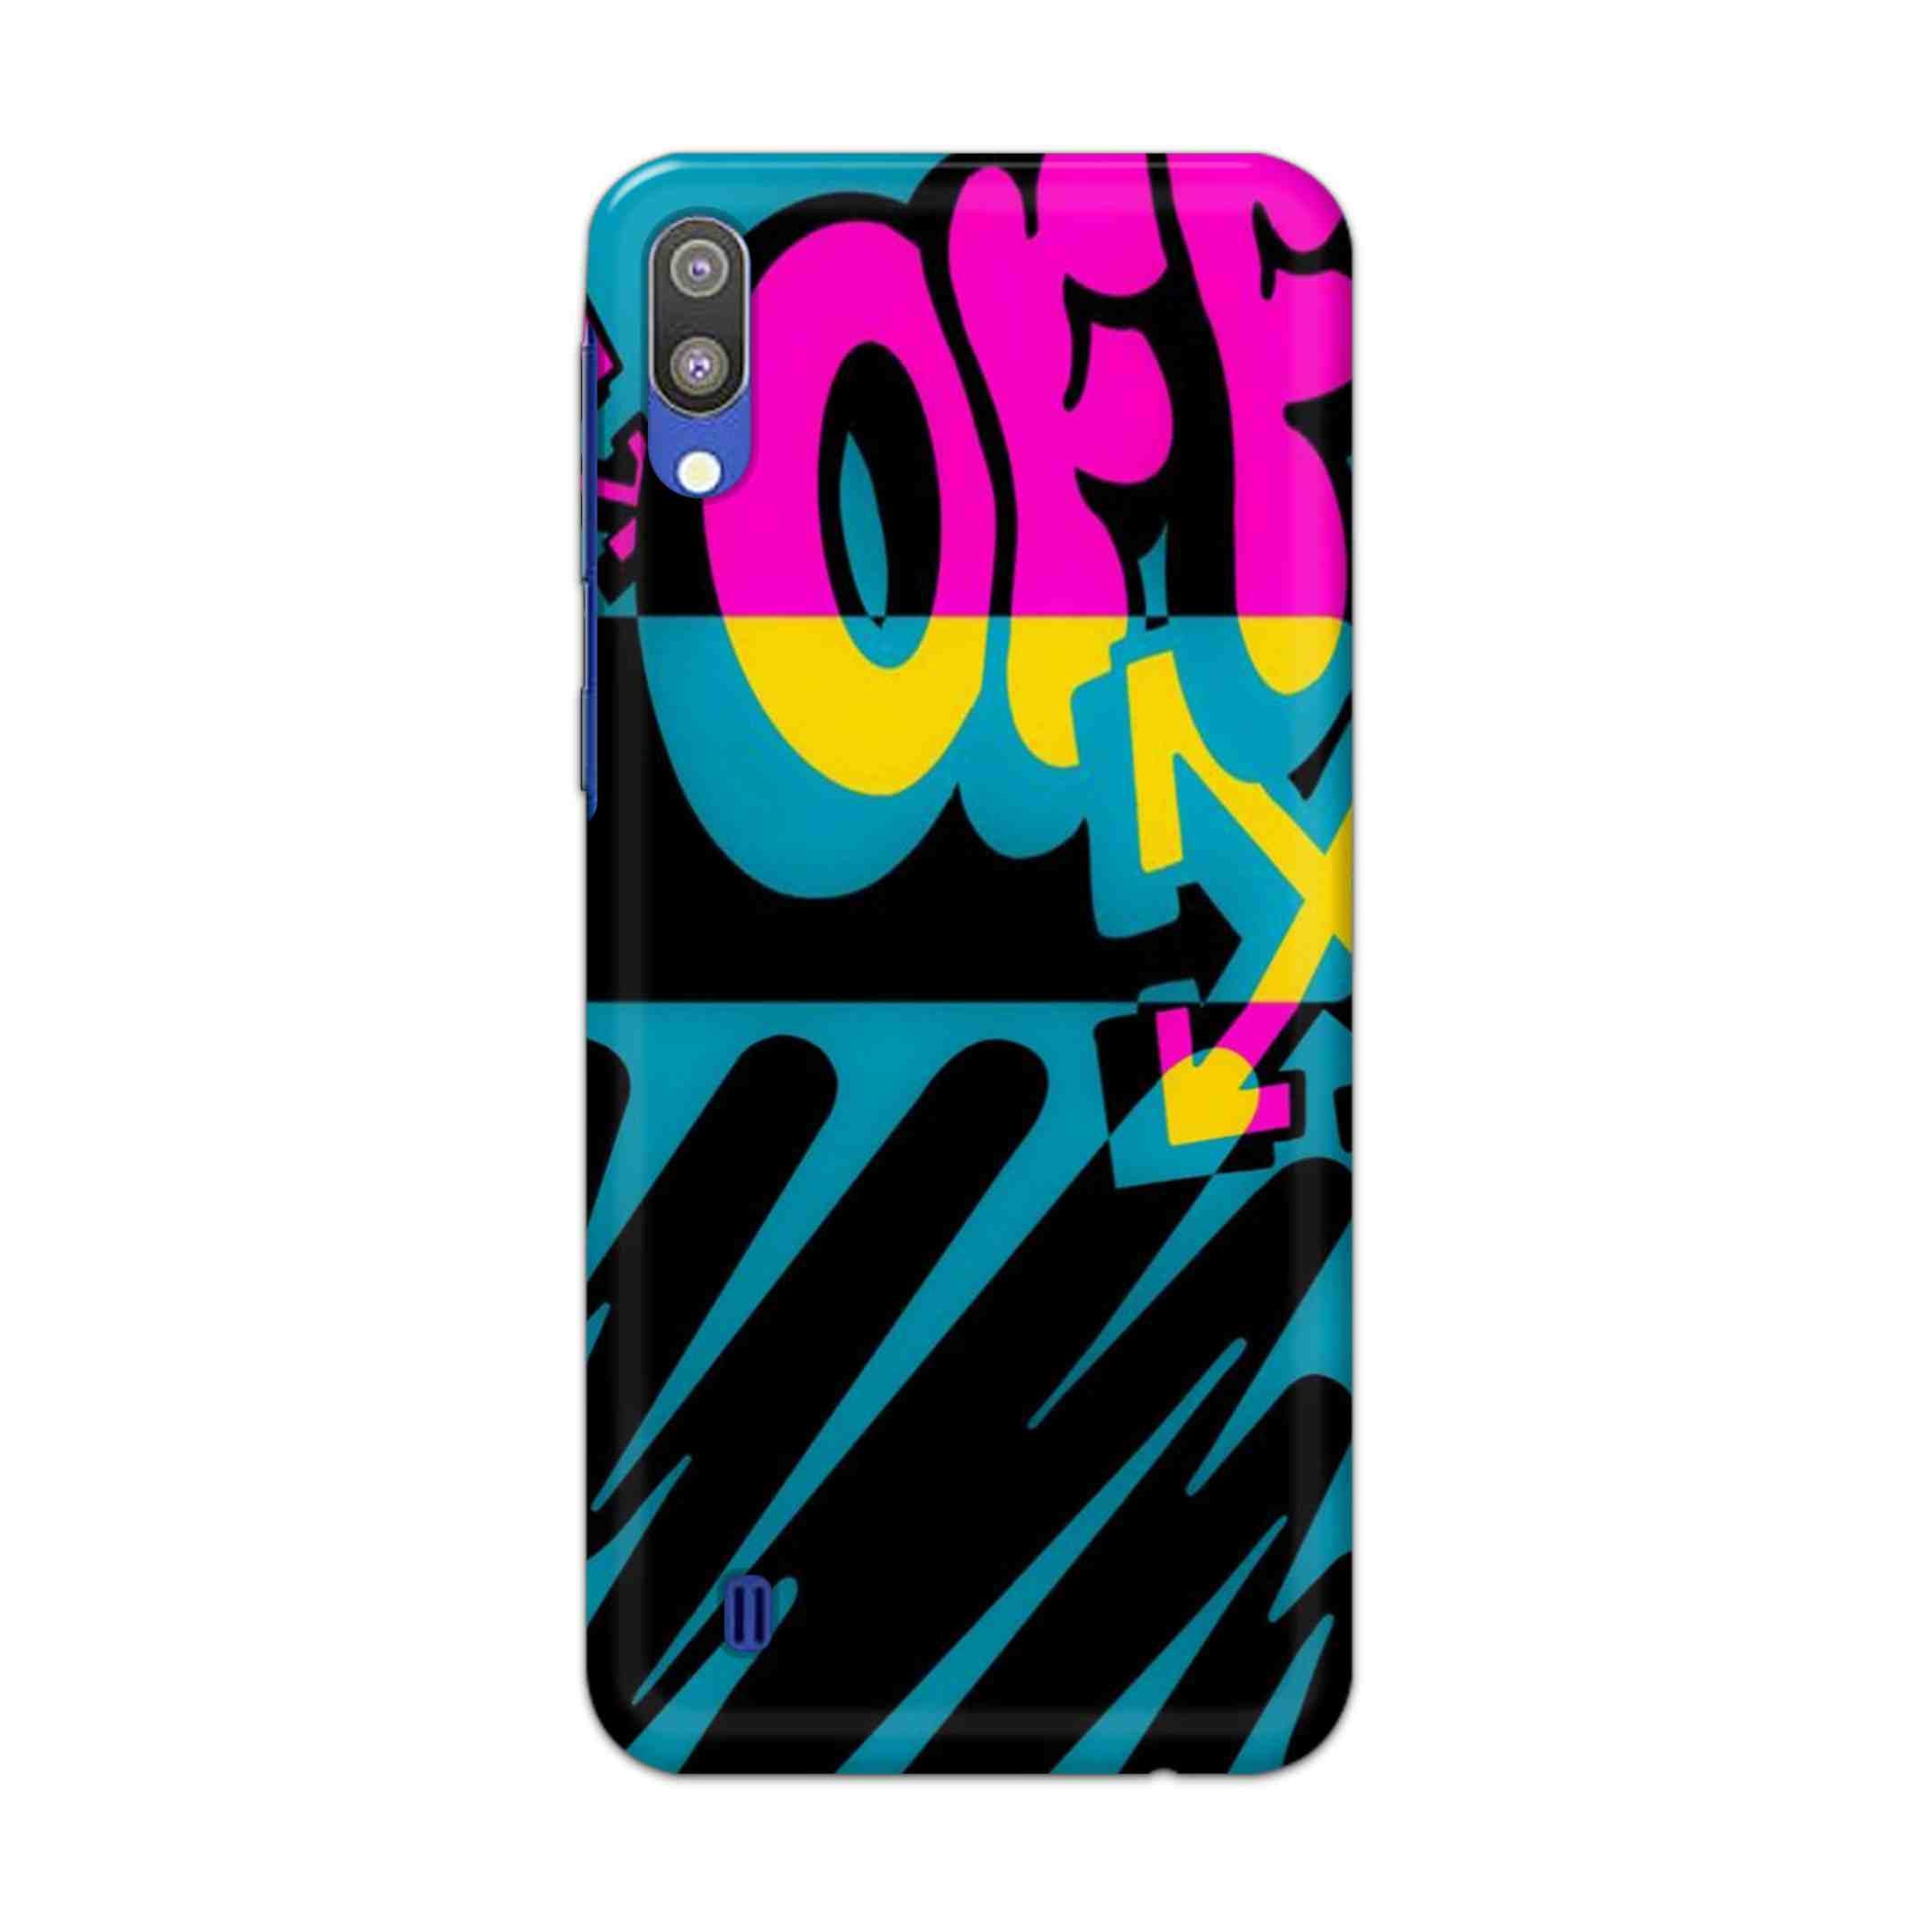 Buy Off Hard Back Mobile Phone Case Cover For Samsung Galaxy M10 Online